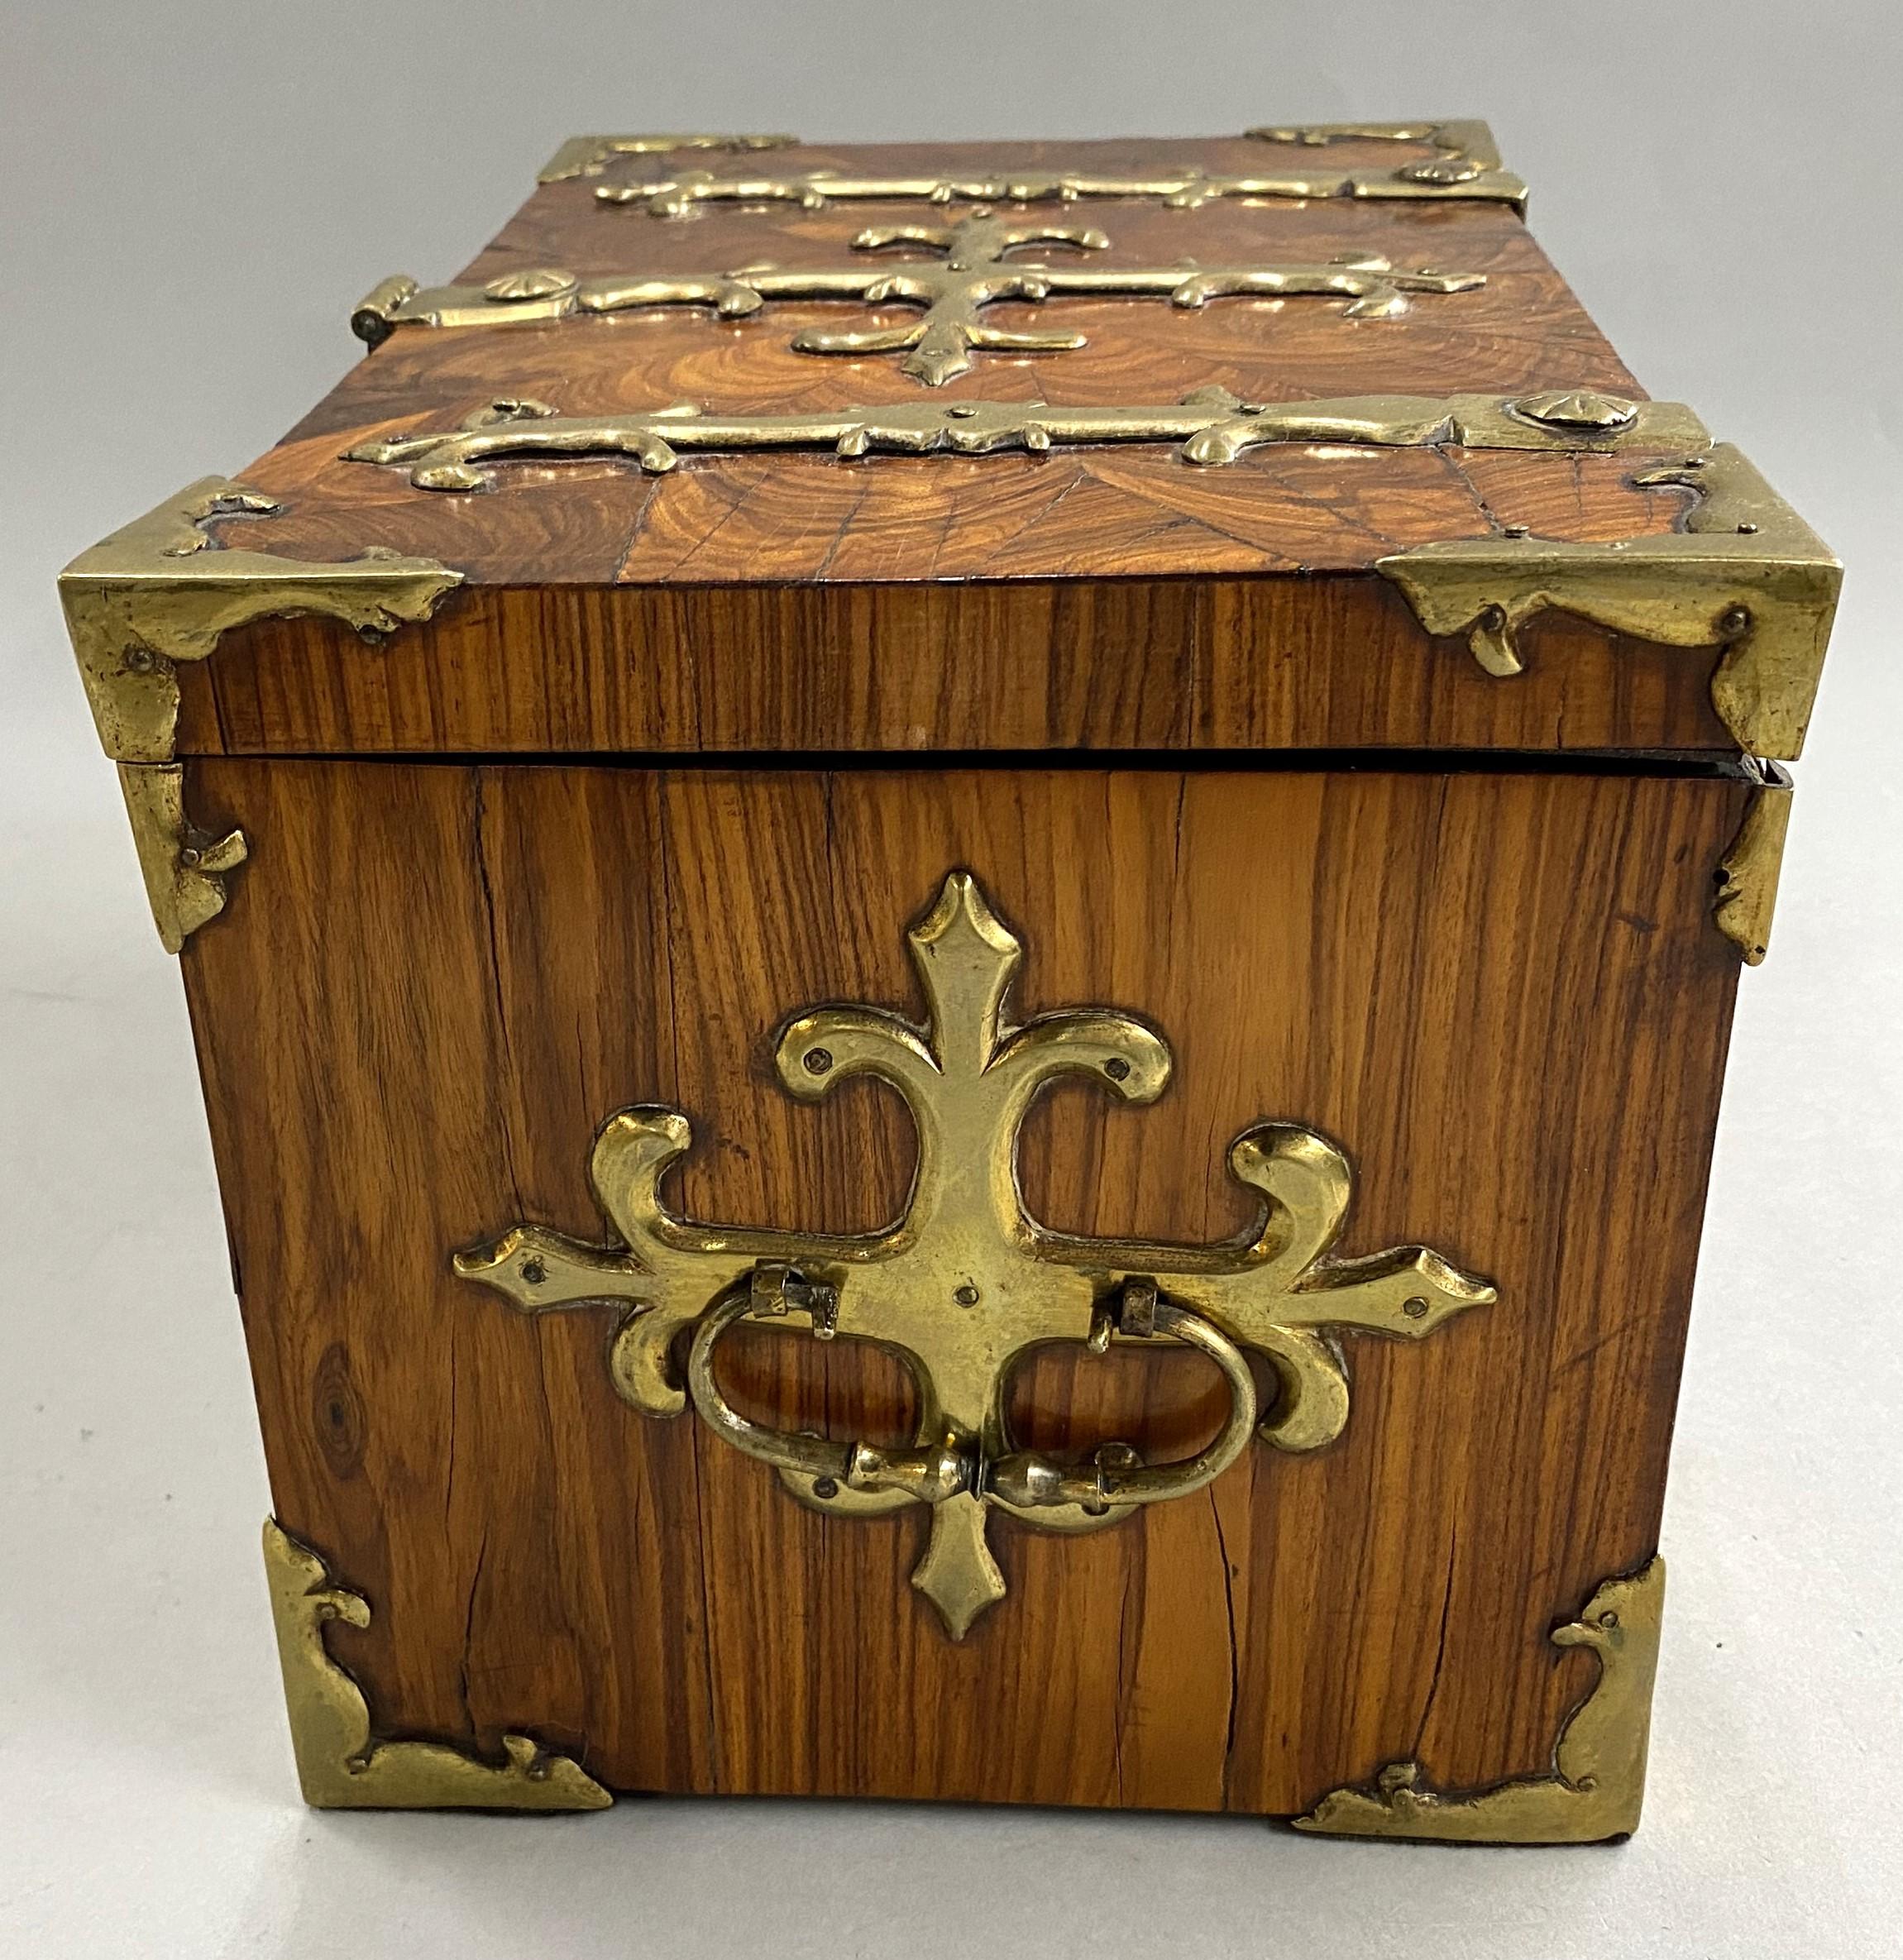 Hand-Carved Rare 17th Century English Coffre Fort or Strong Box, circa 1690 For Sale